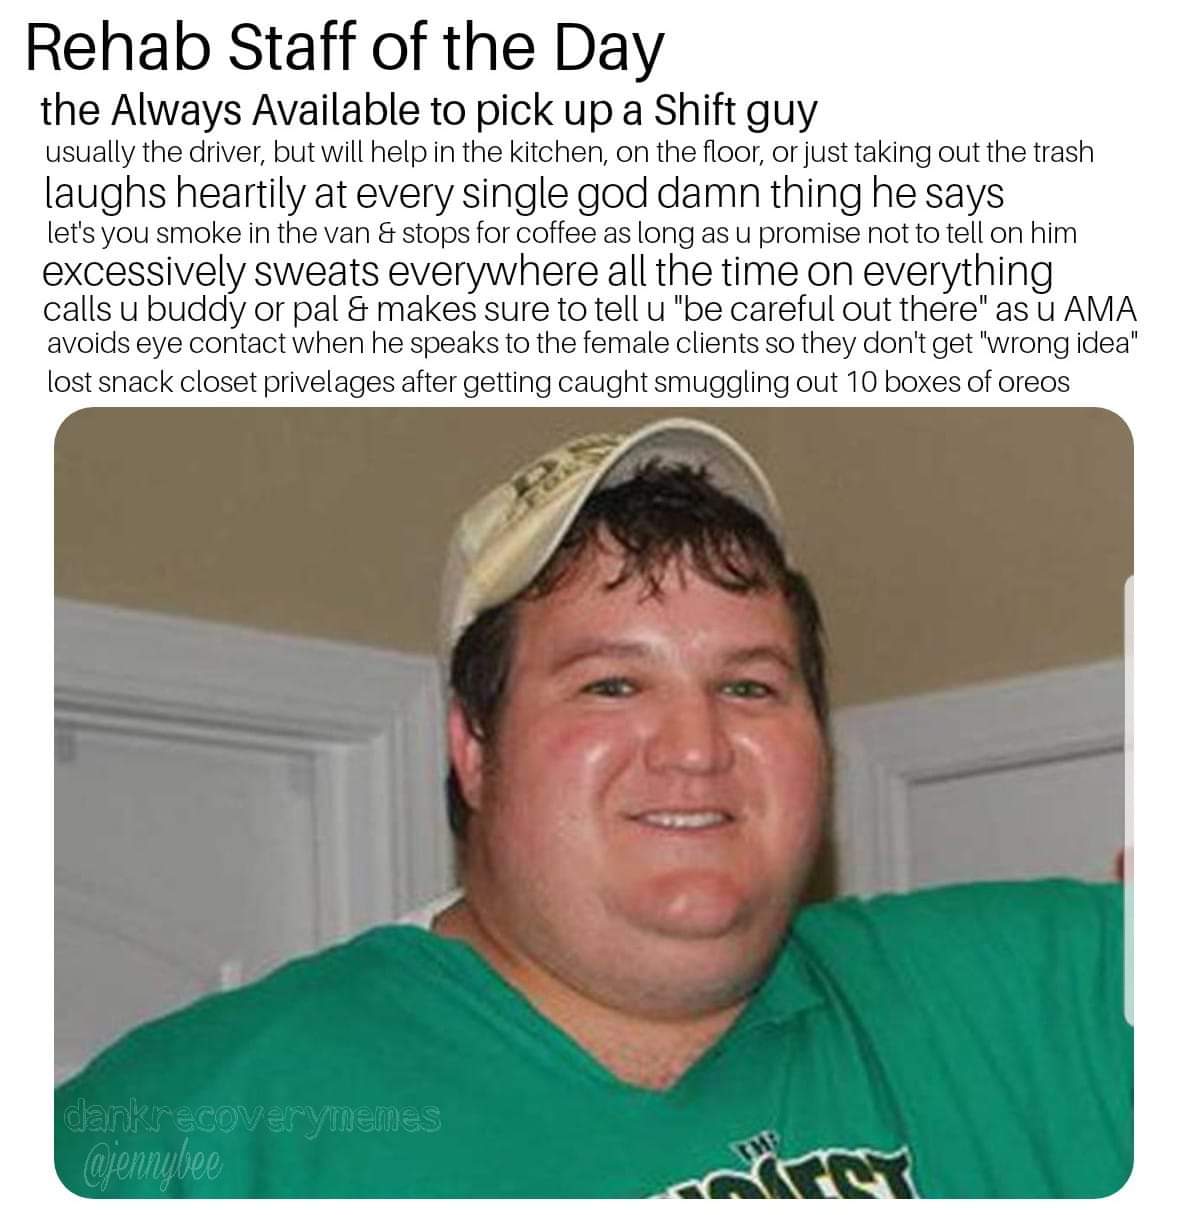 photo caption - Rehab Staff of the Day the Always Available to pick up a Shift guy usually the driver, but will help in the kitchen, on the floor, or just taking out the trash laughs heartily at every single god damn thing he says let's you smoke in the v